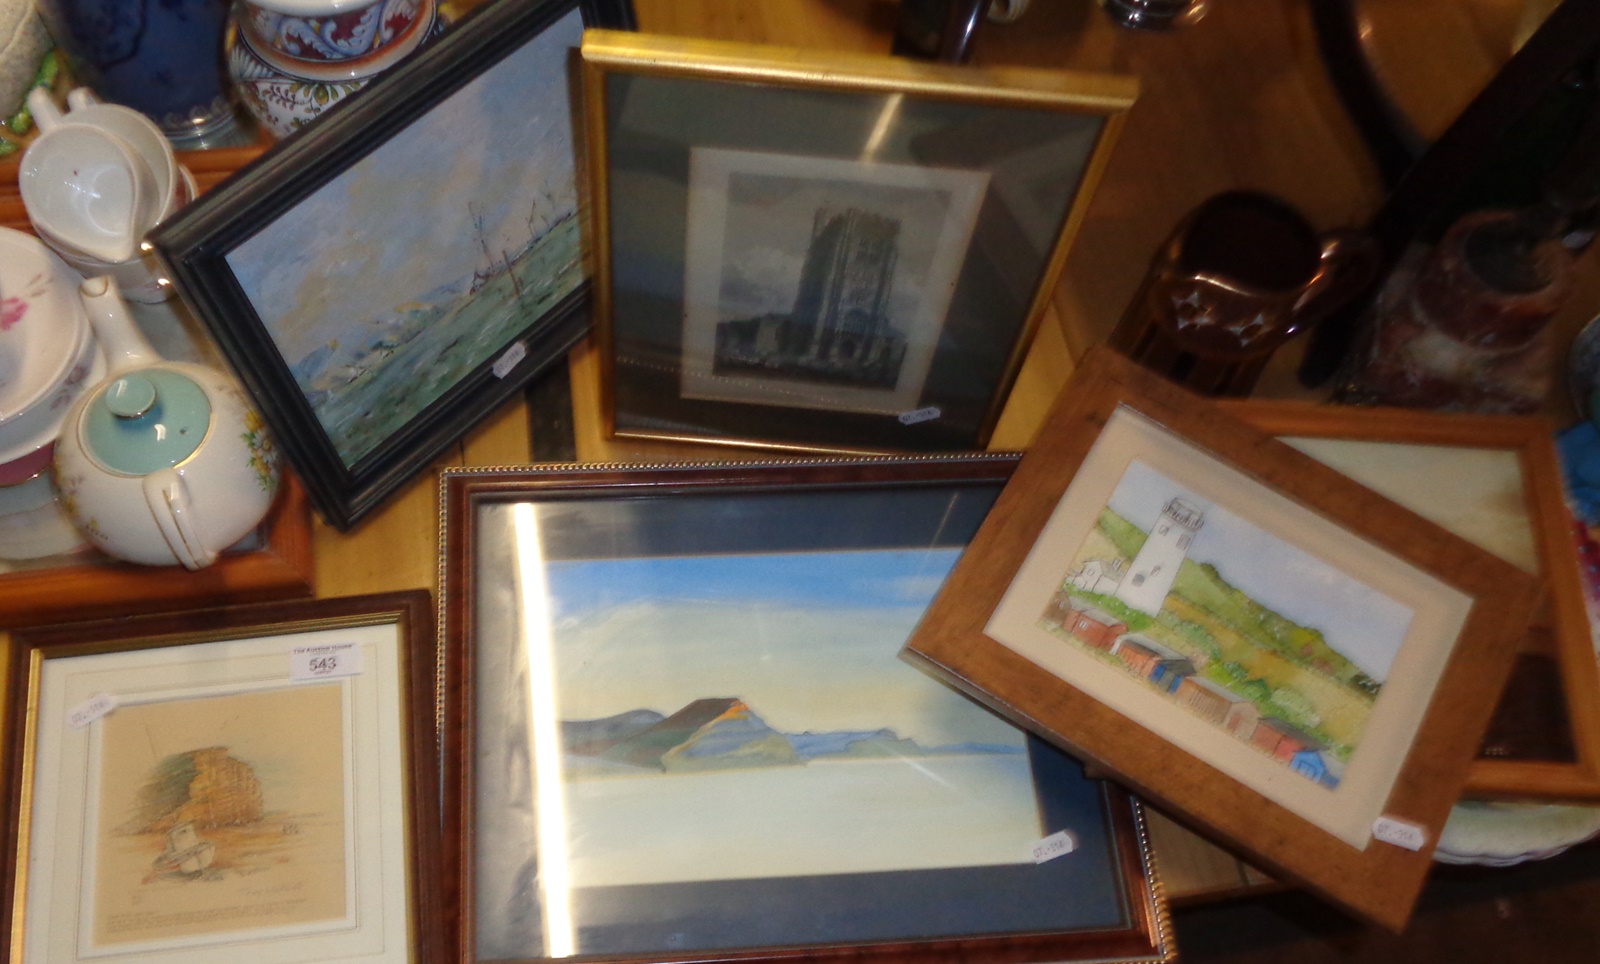 Six various paintings and prints of local scenes, inc. Terry Whitworth print of East Cliff, etc.